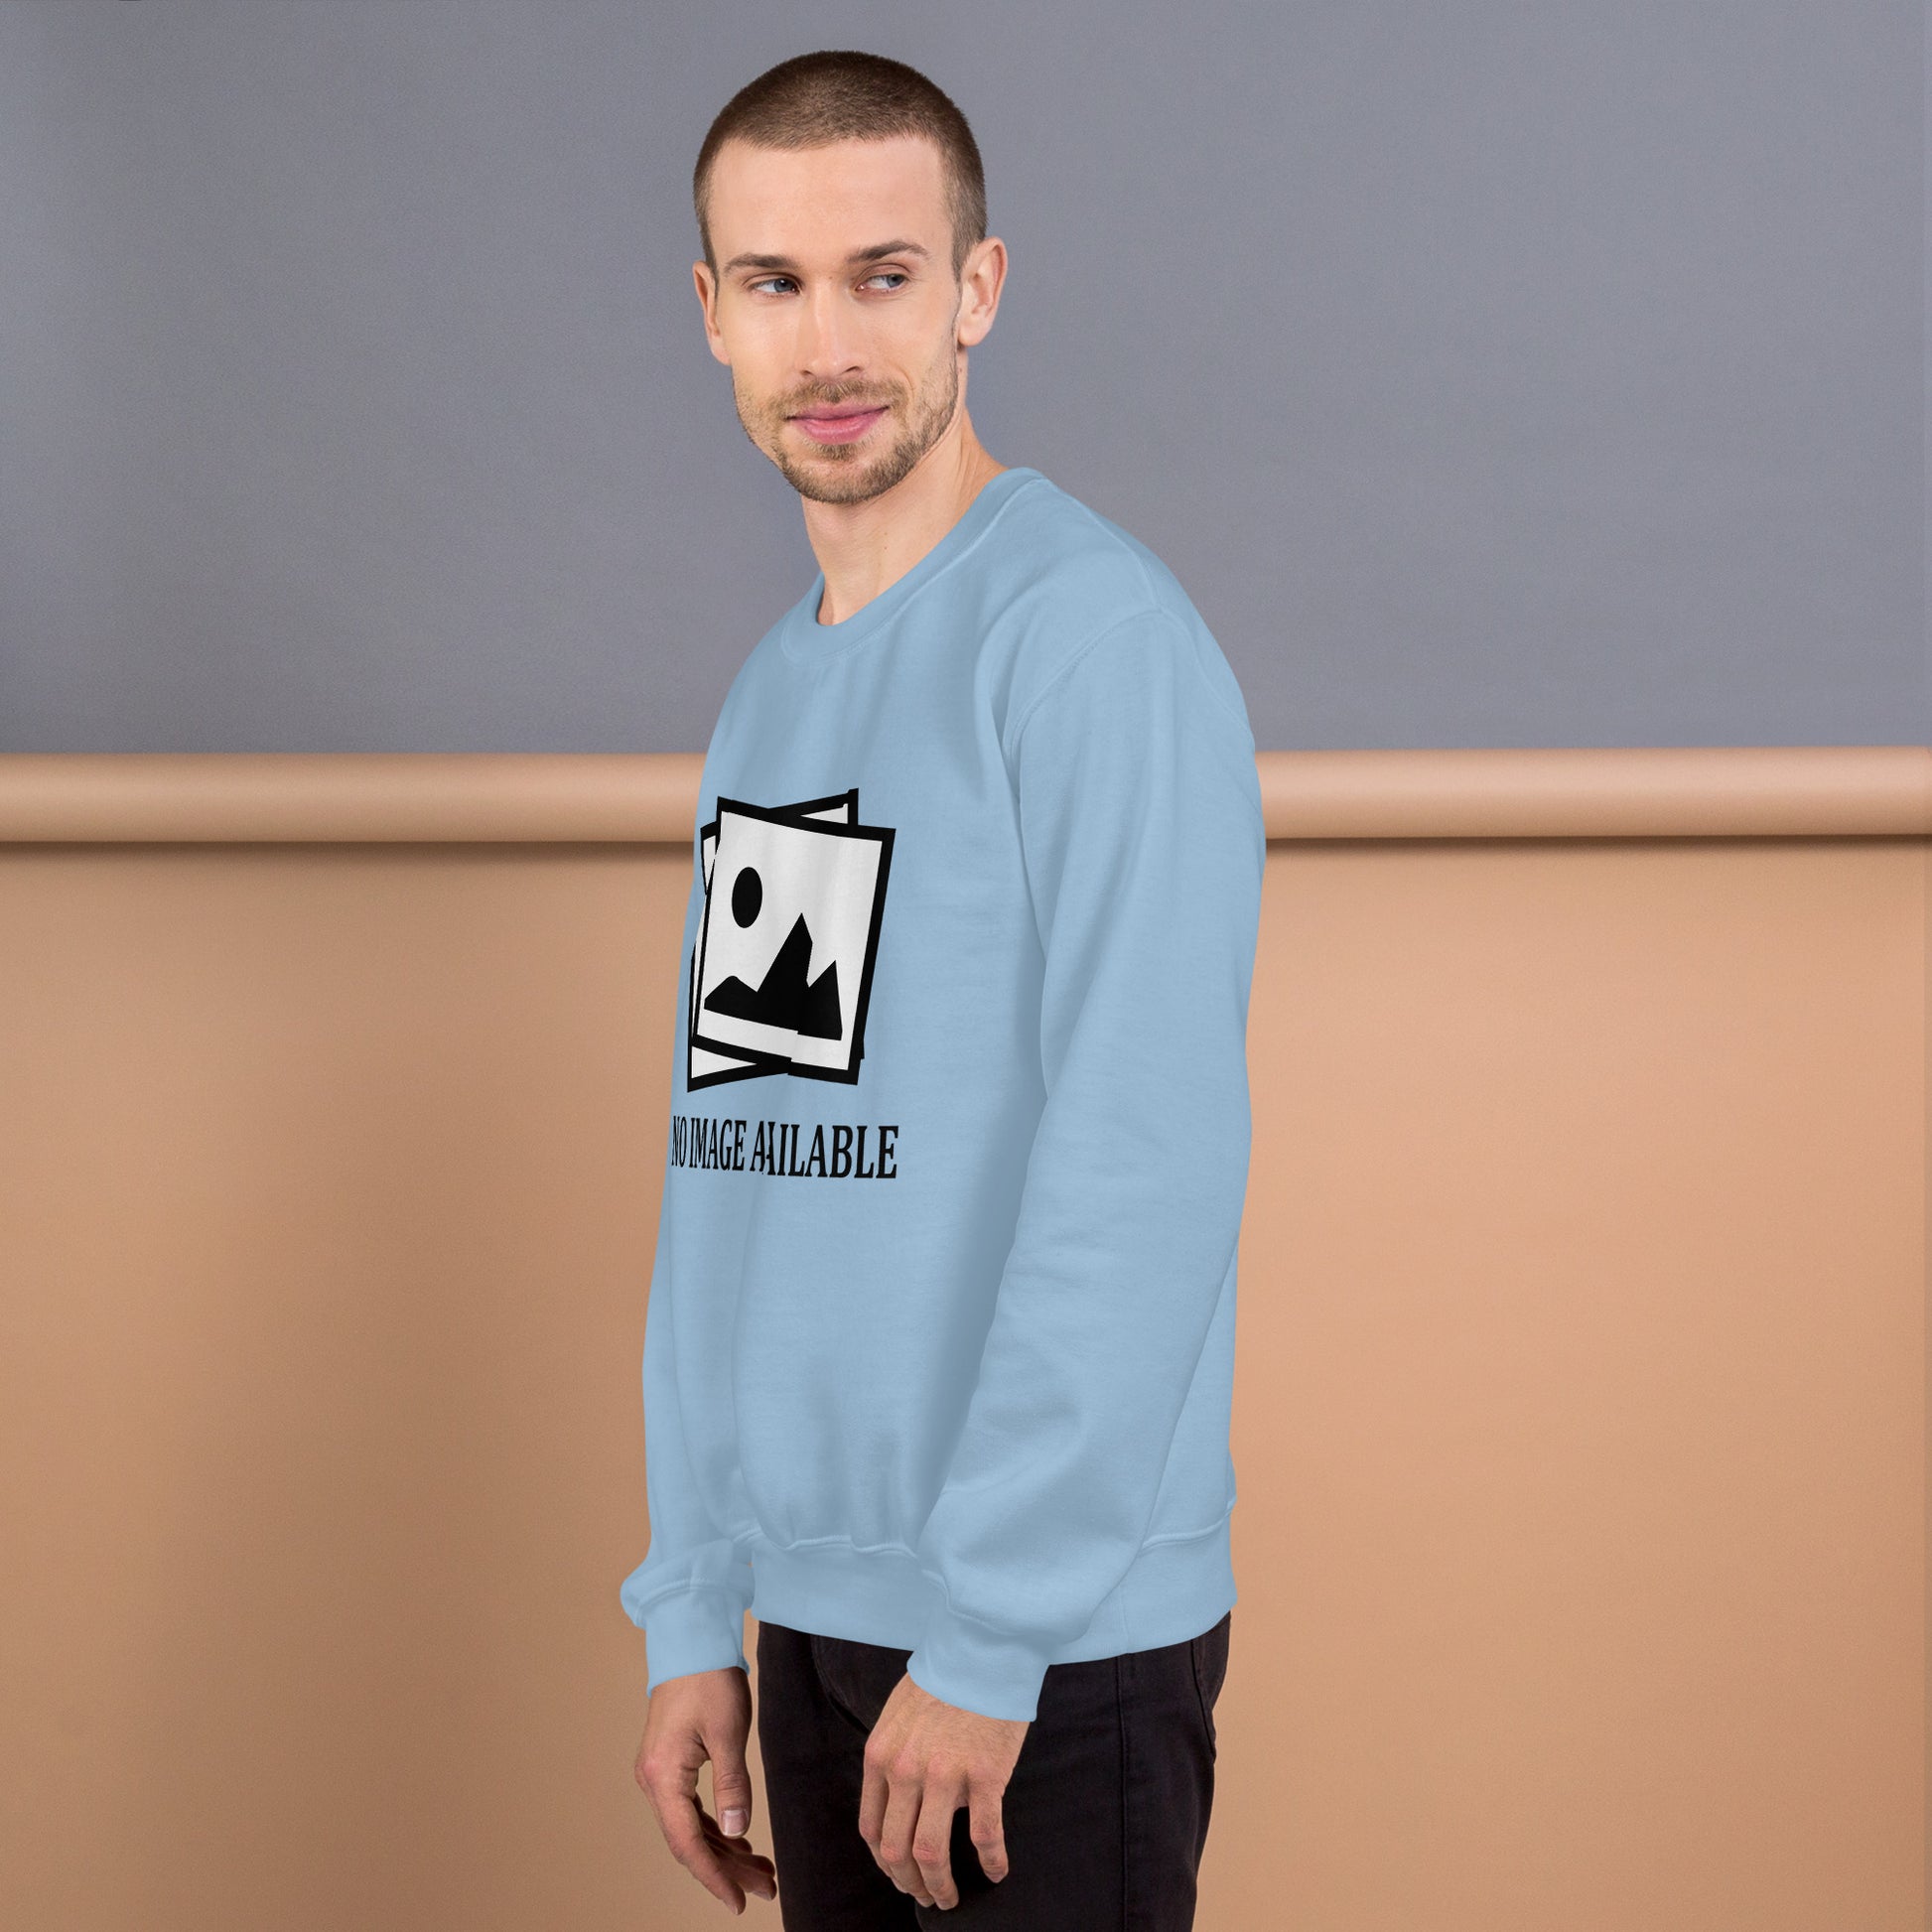 Men with light blue sweatshirt with image and text "no image available"